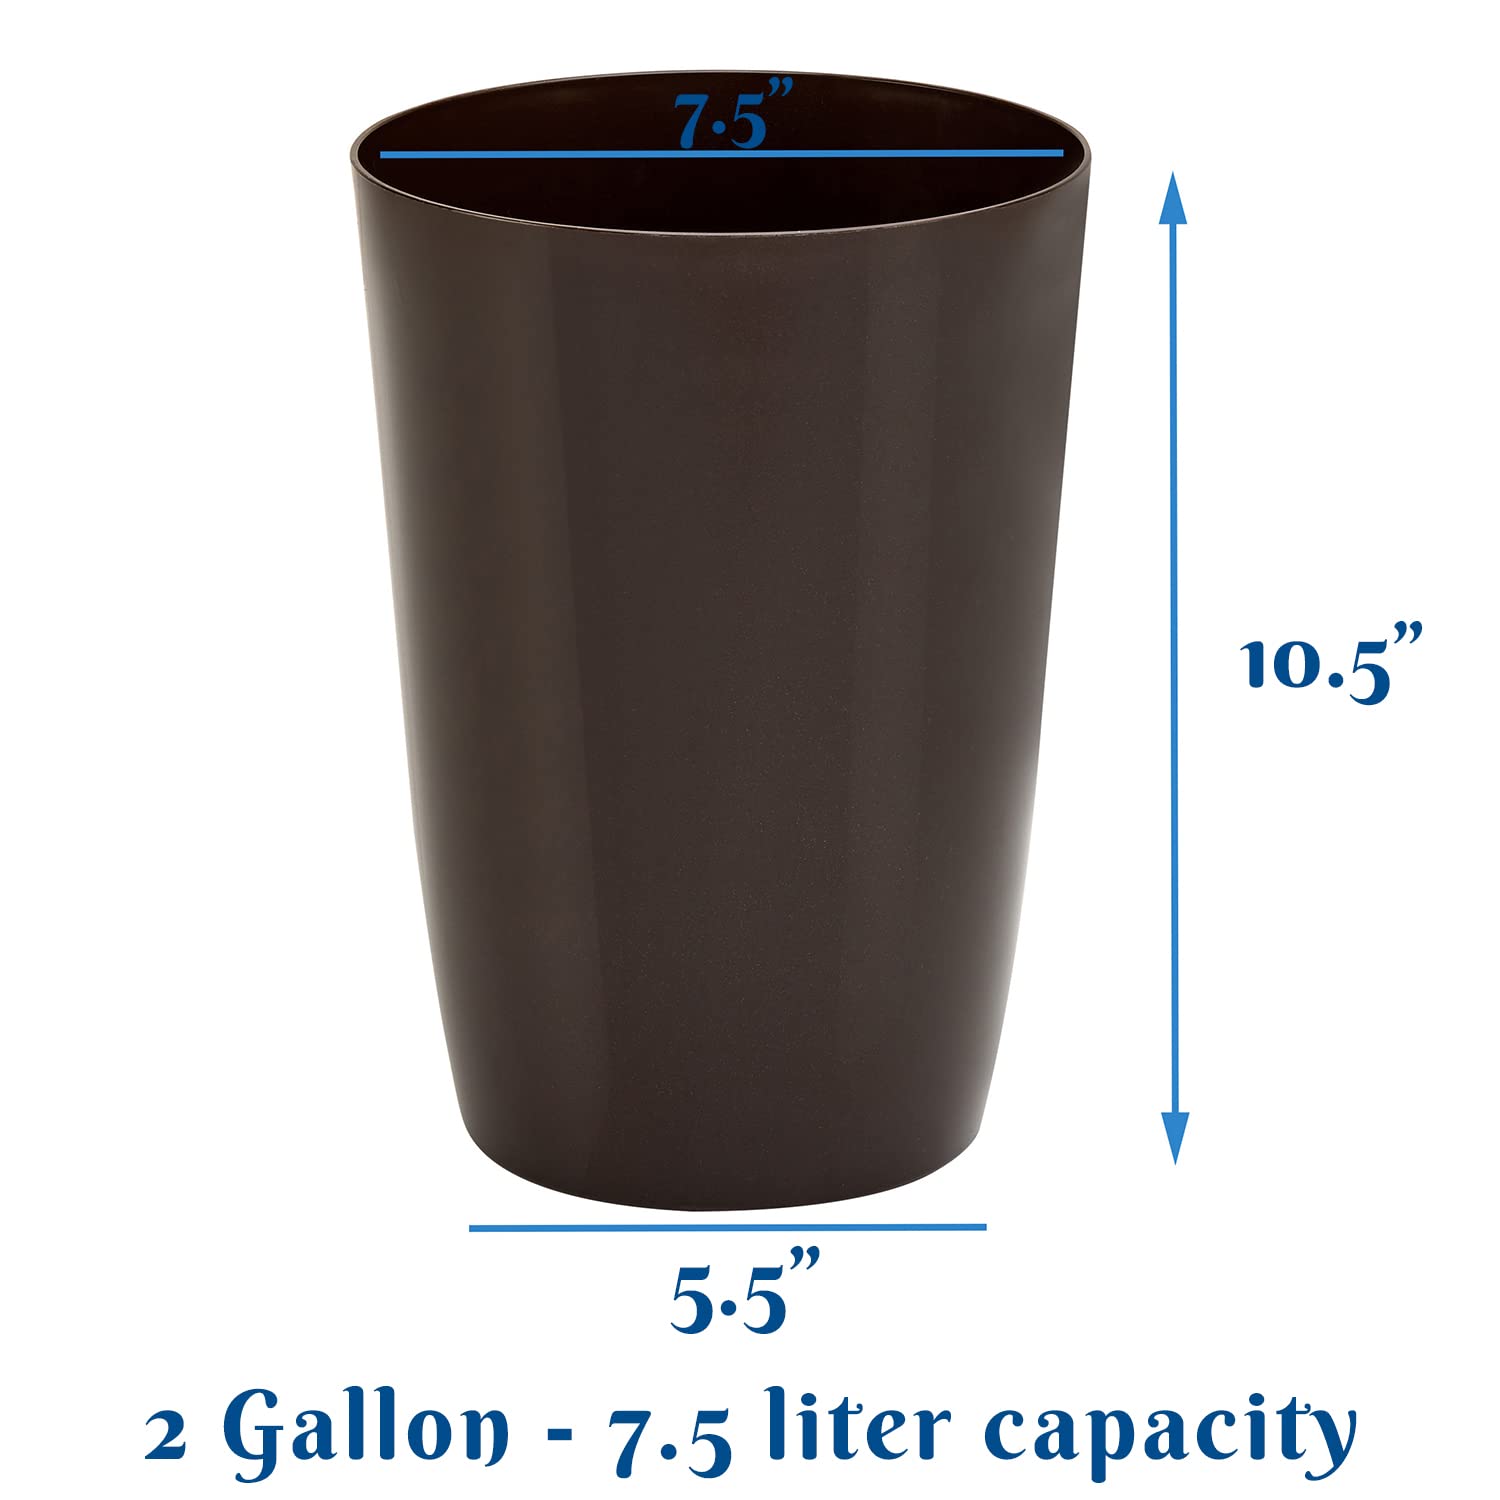 Small Trash Can – Open Top Garbage Cans for Kitchen, Office, Dorm, Bathroom, etc. –Waste Can for Compact/Tight Spaces – The Perfect Bathroom Trash Can - 2 Gallon Trash Bin – Glossy